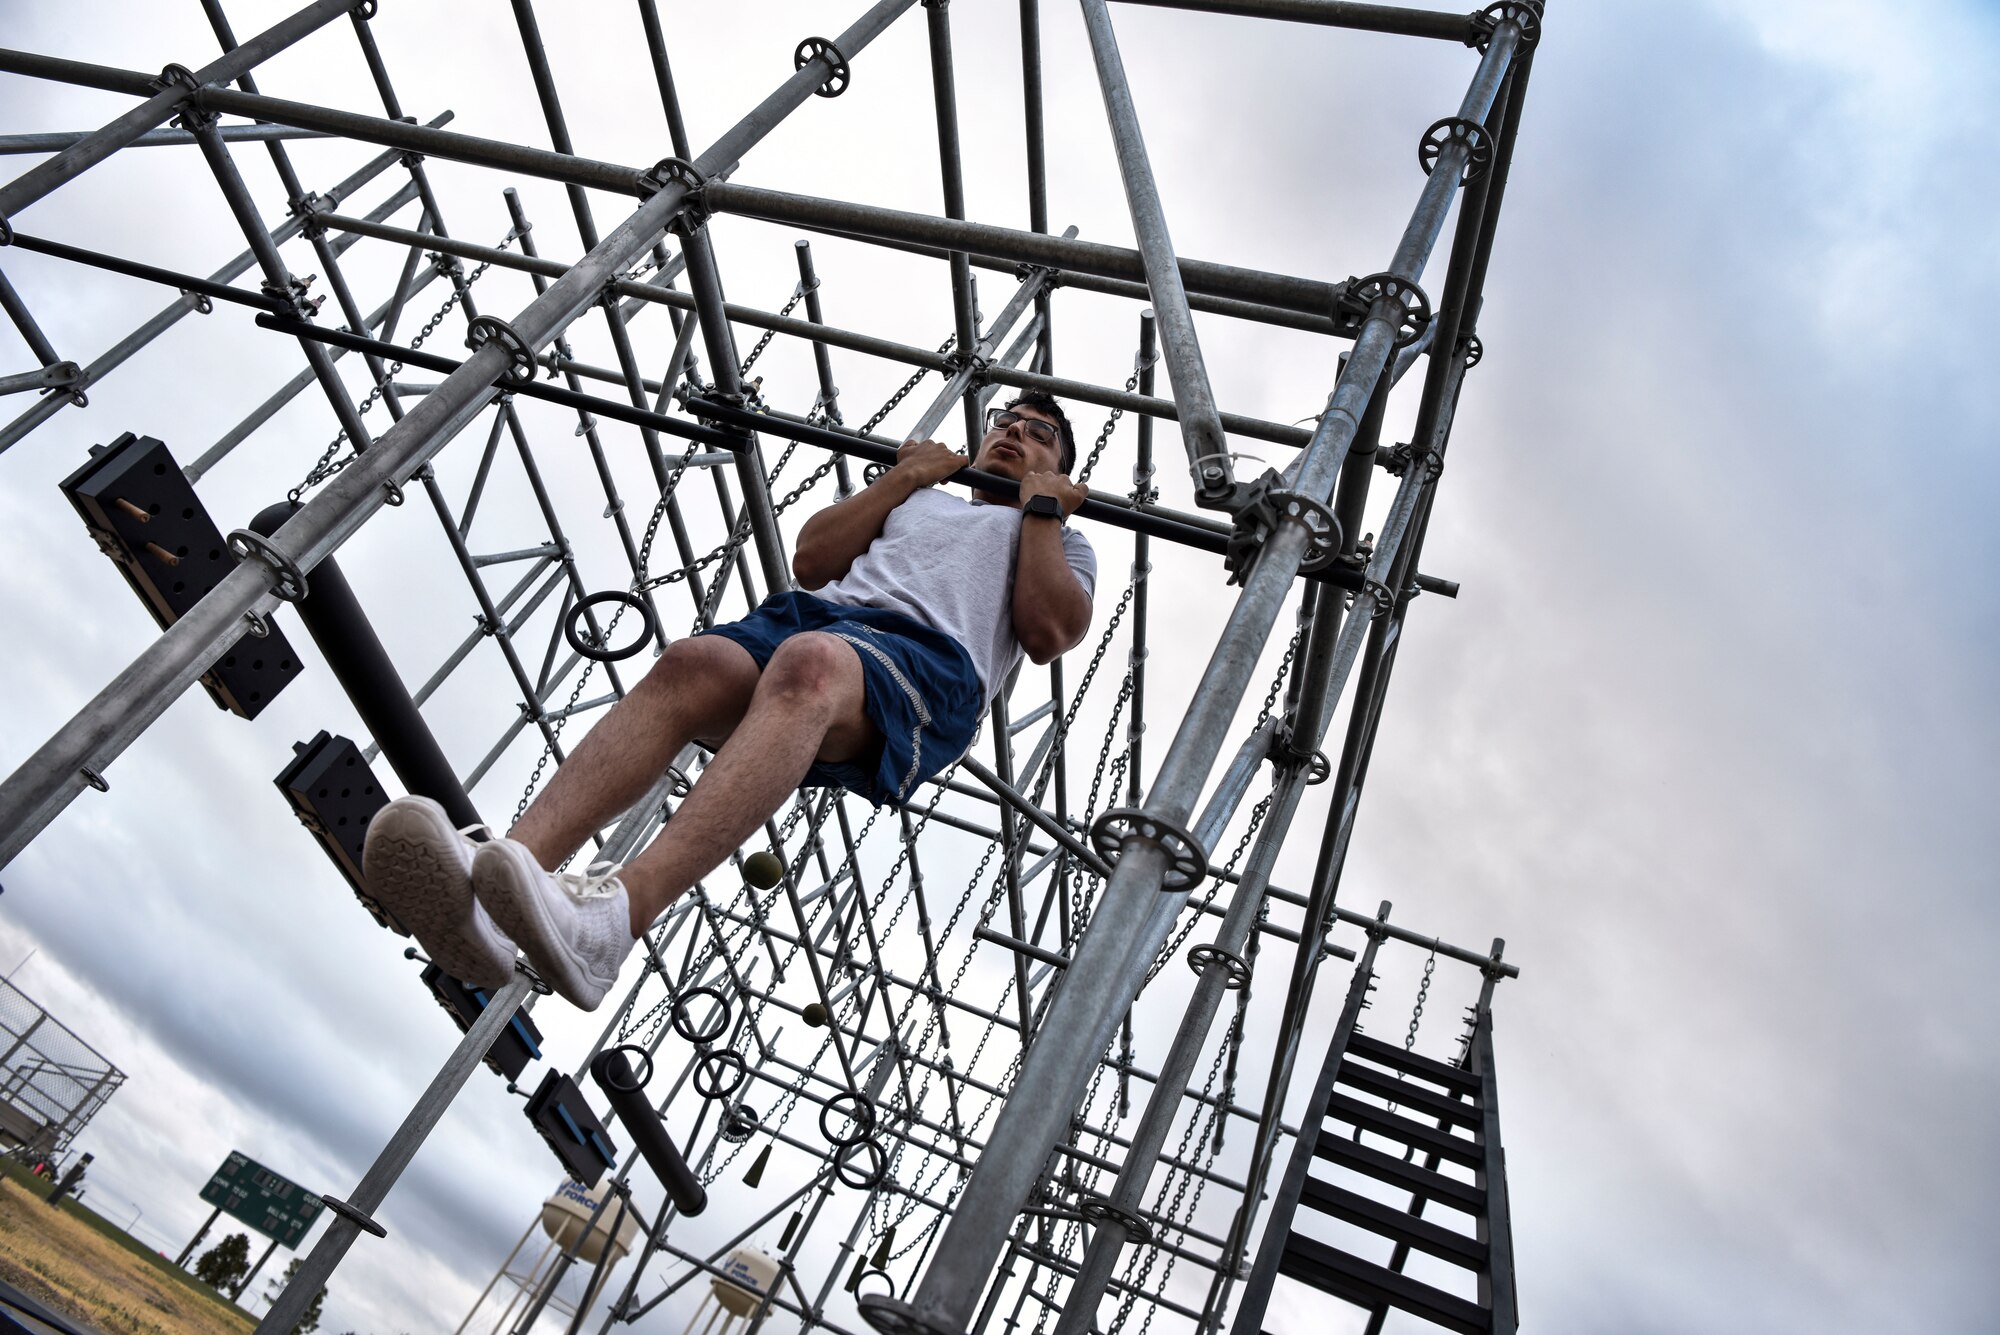 Airman 1st Class Marc Cisneros, a 47th Security Forces Squadron installation entry controller, performs a chin-up at Laughlin Air Force Base, Texas, Oct. 10, 2019. One component of the German Armed Forces Badge for Military Proficiency qualification test is being able to hold a chin up for more than 60 seconds. (U.S. Air Force photo by Senior Airman Marco A. Gomez)